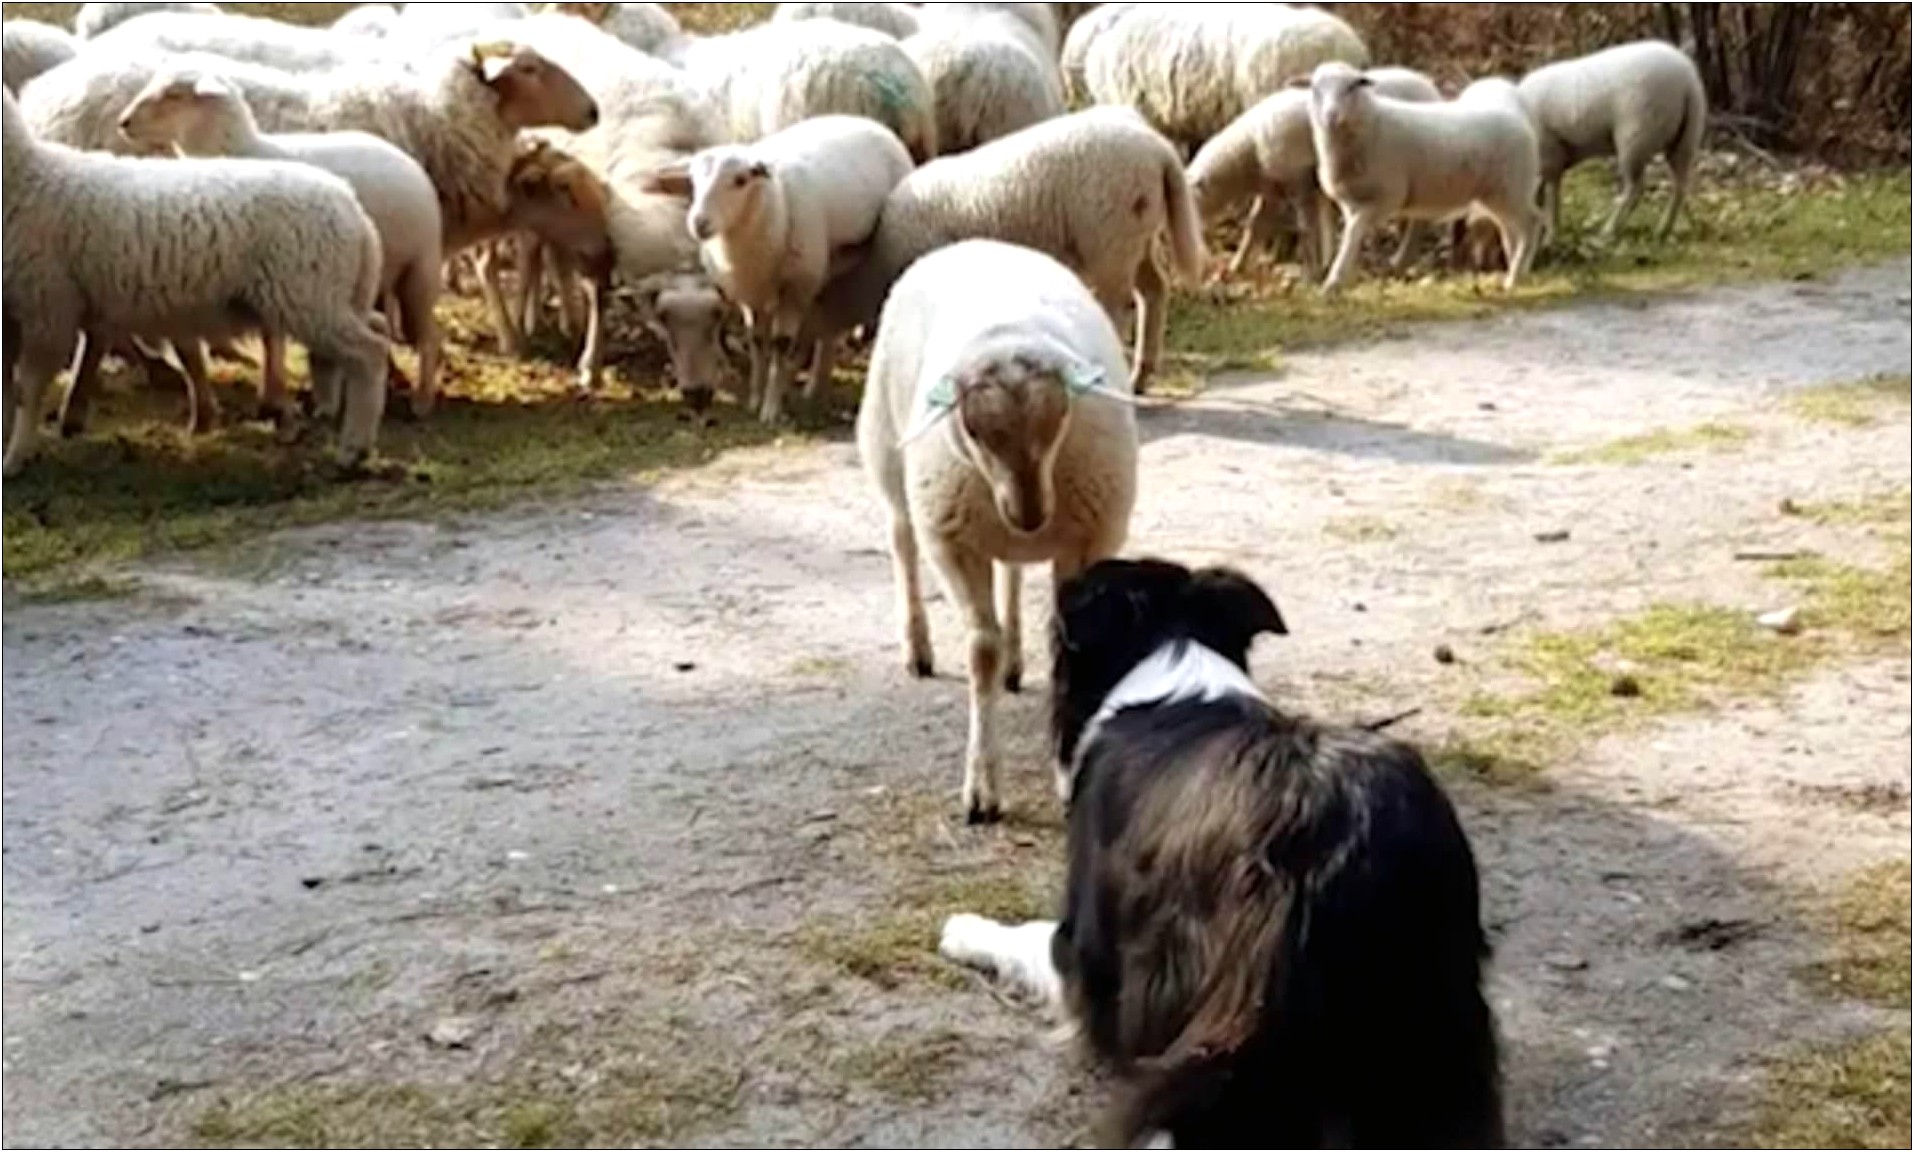 You Lied On Your Resume About Sheepdog Experience